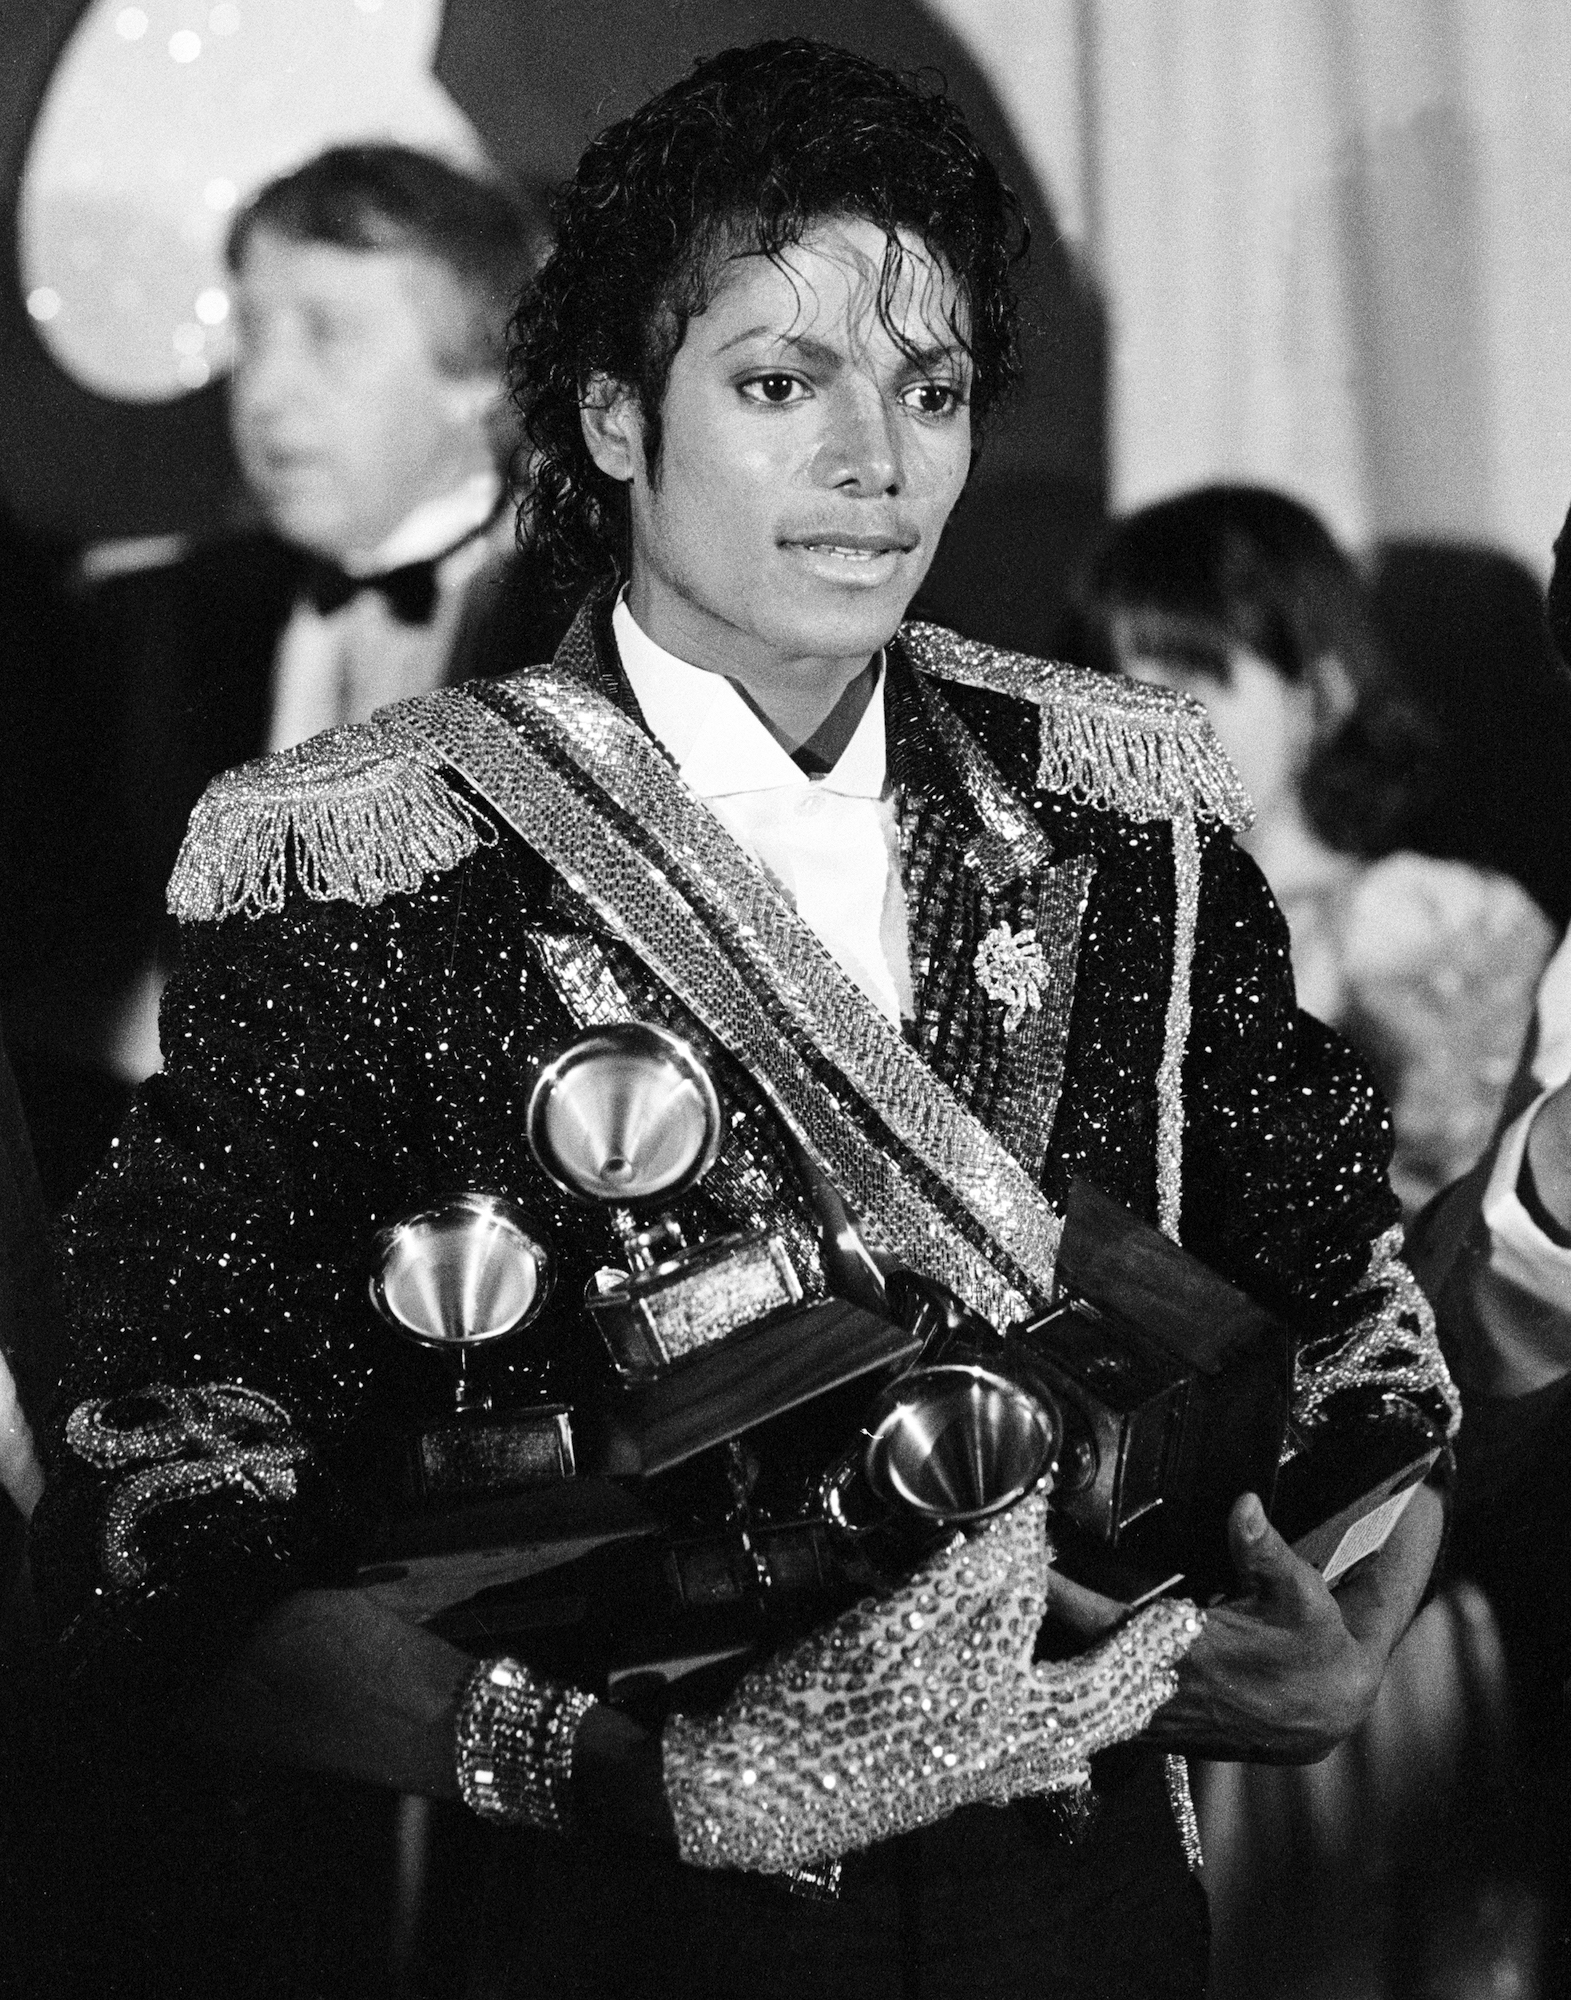 Michael Jackson at the 26th Annual Grammy Awards